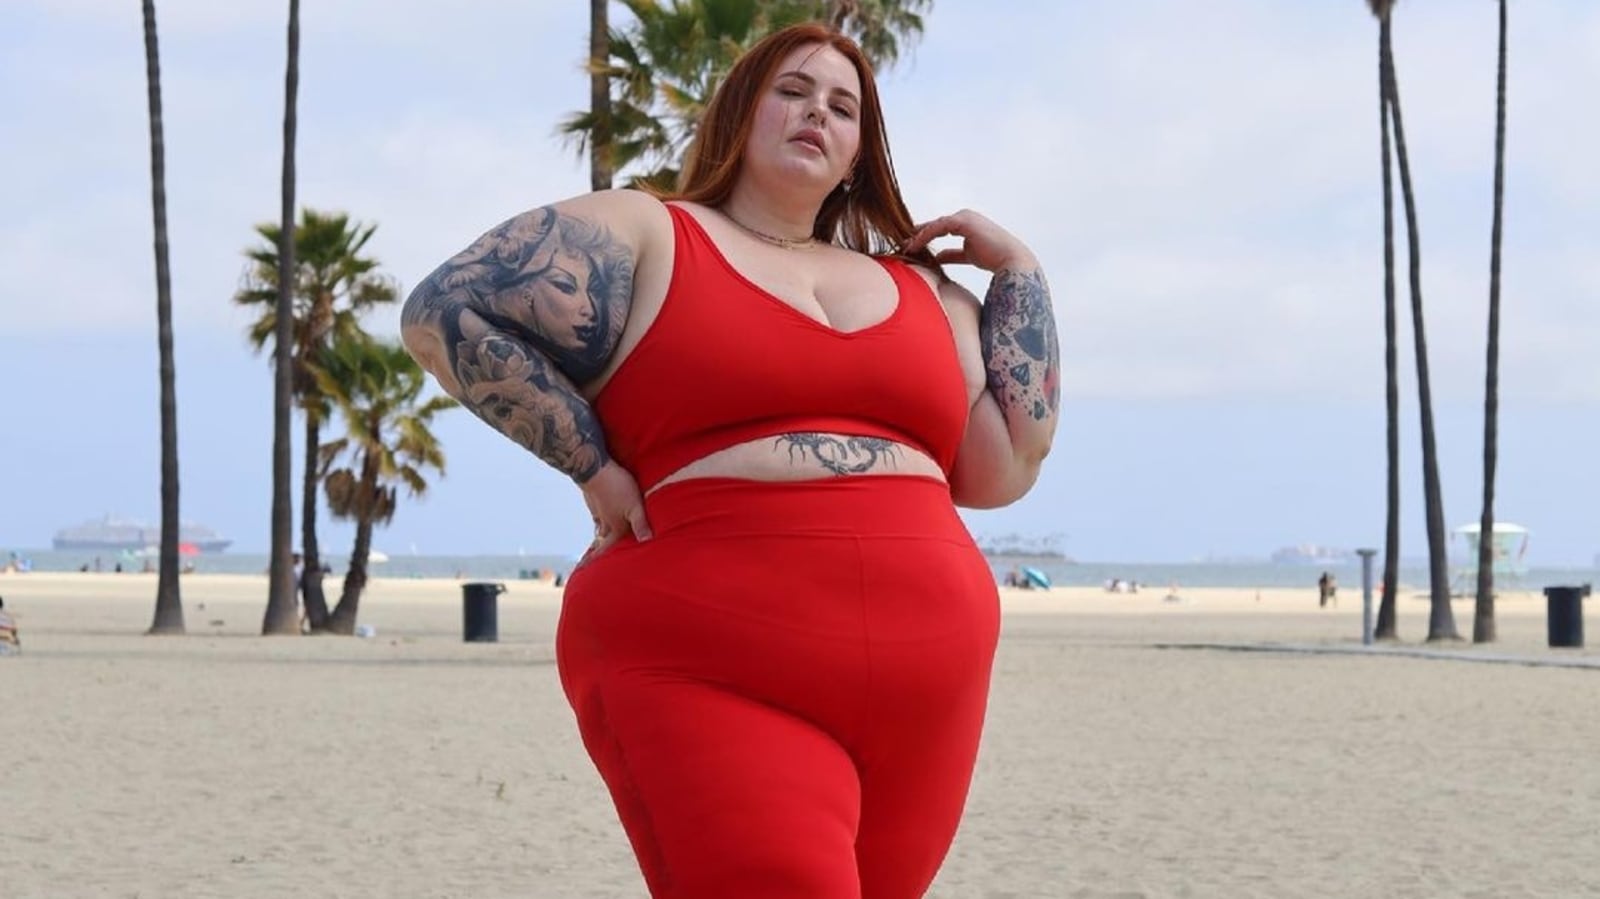 I Am Anorexic Plus Size Model Tess Holiday Shares Recovery From Eating.